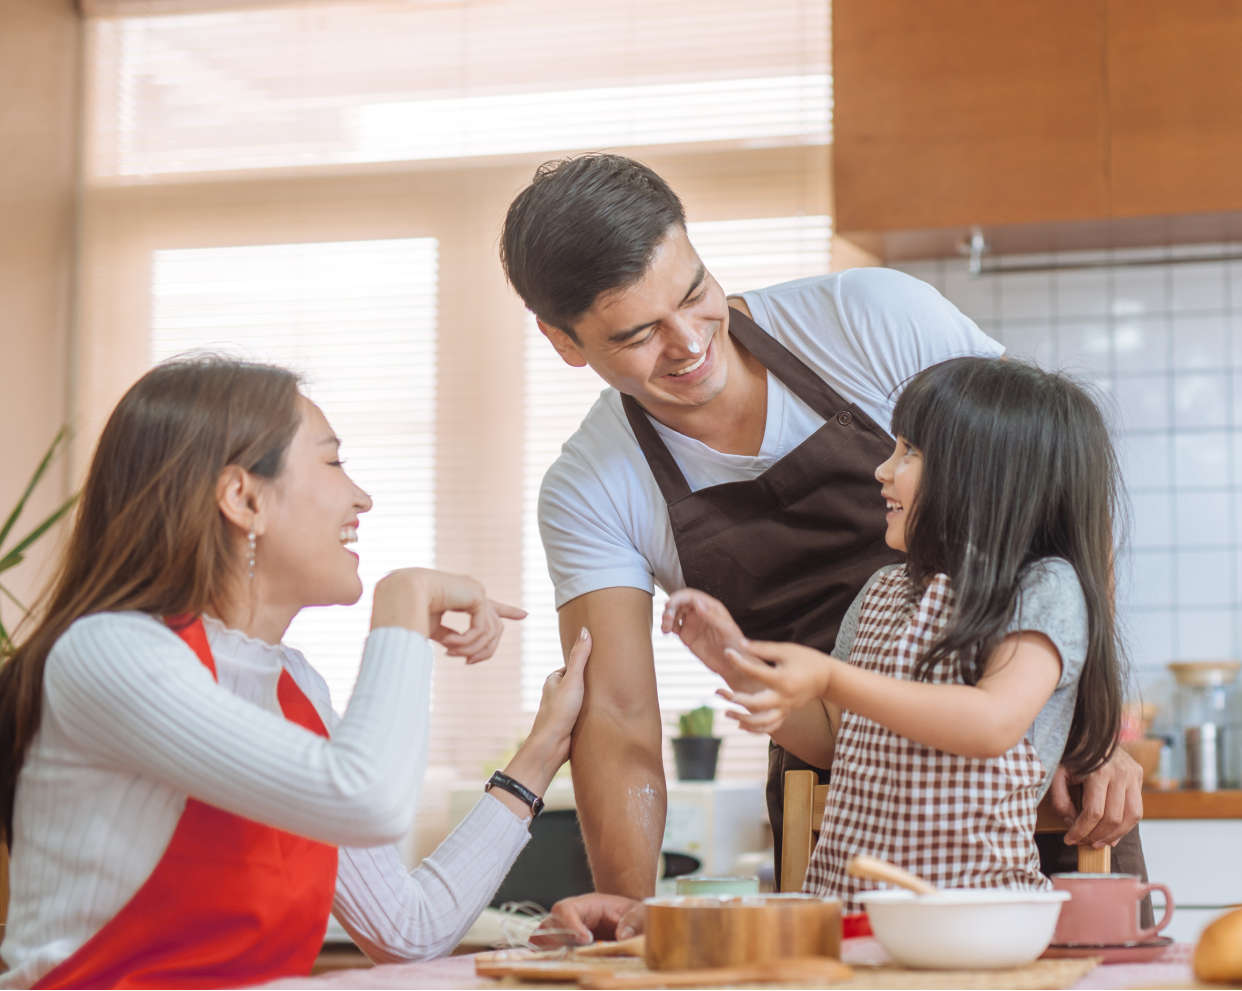 a mother and father happily cooking together in their kitchen with their young daughter